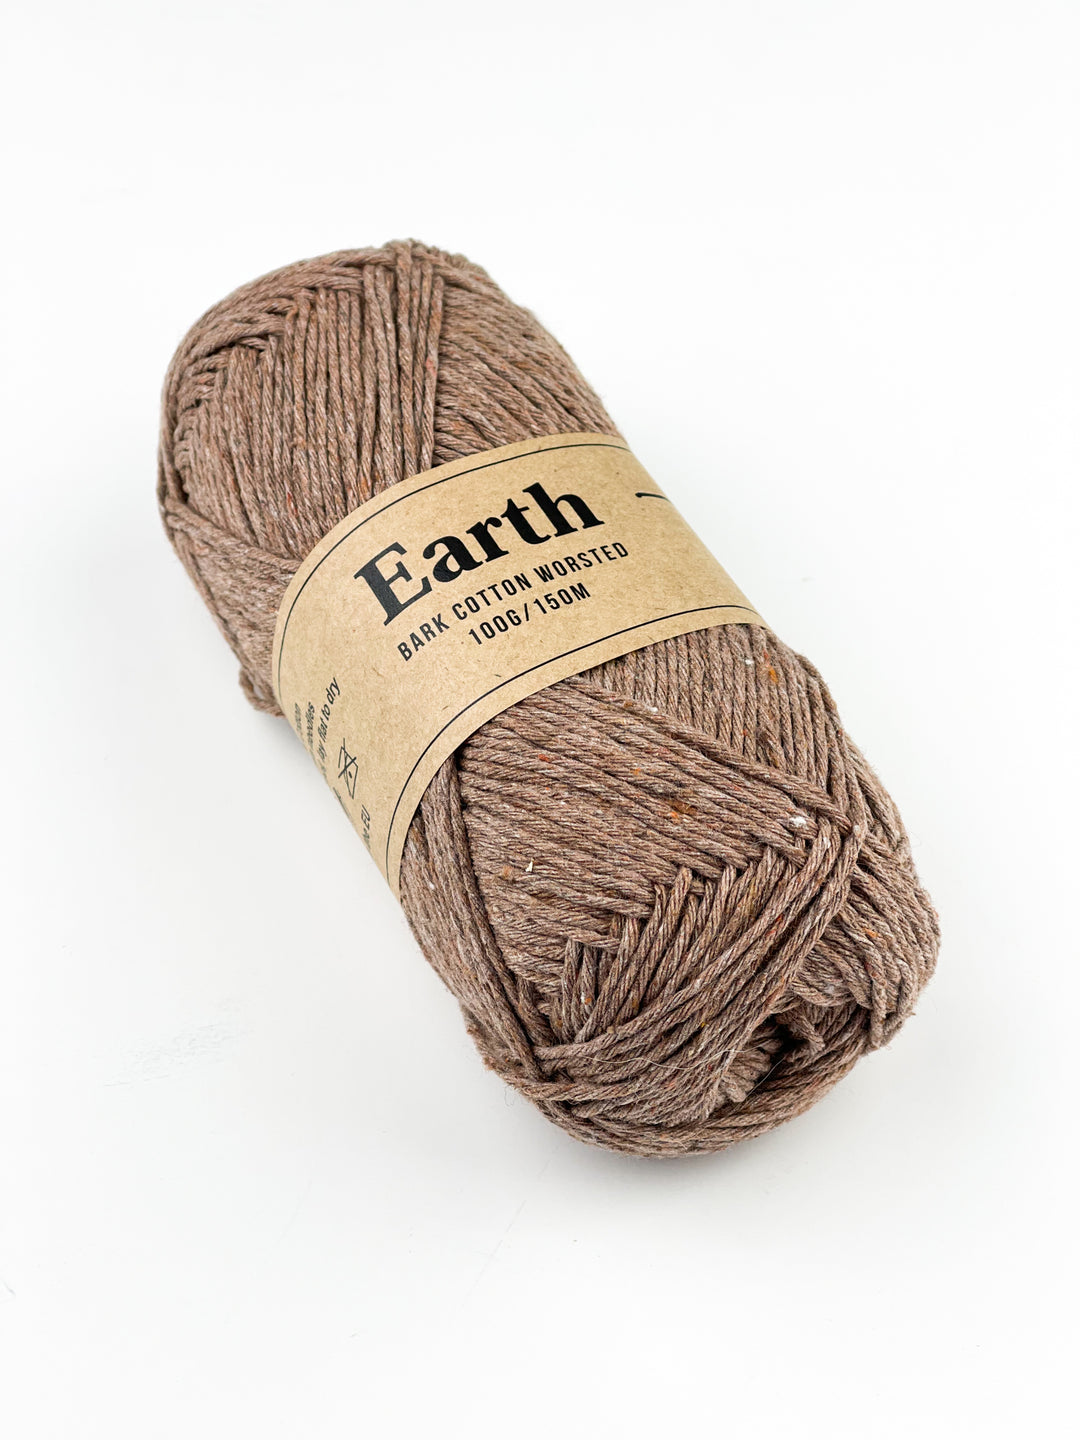 Unravelled Earth Cotton Worsted